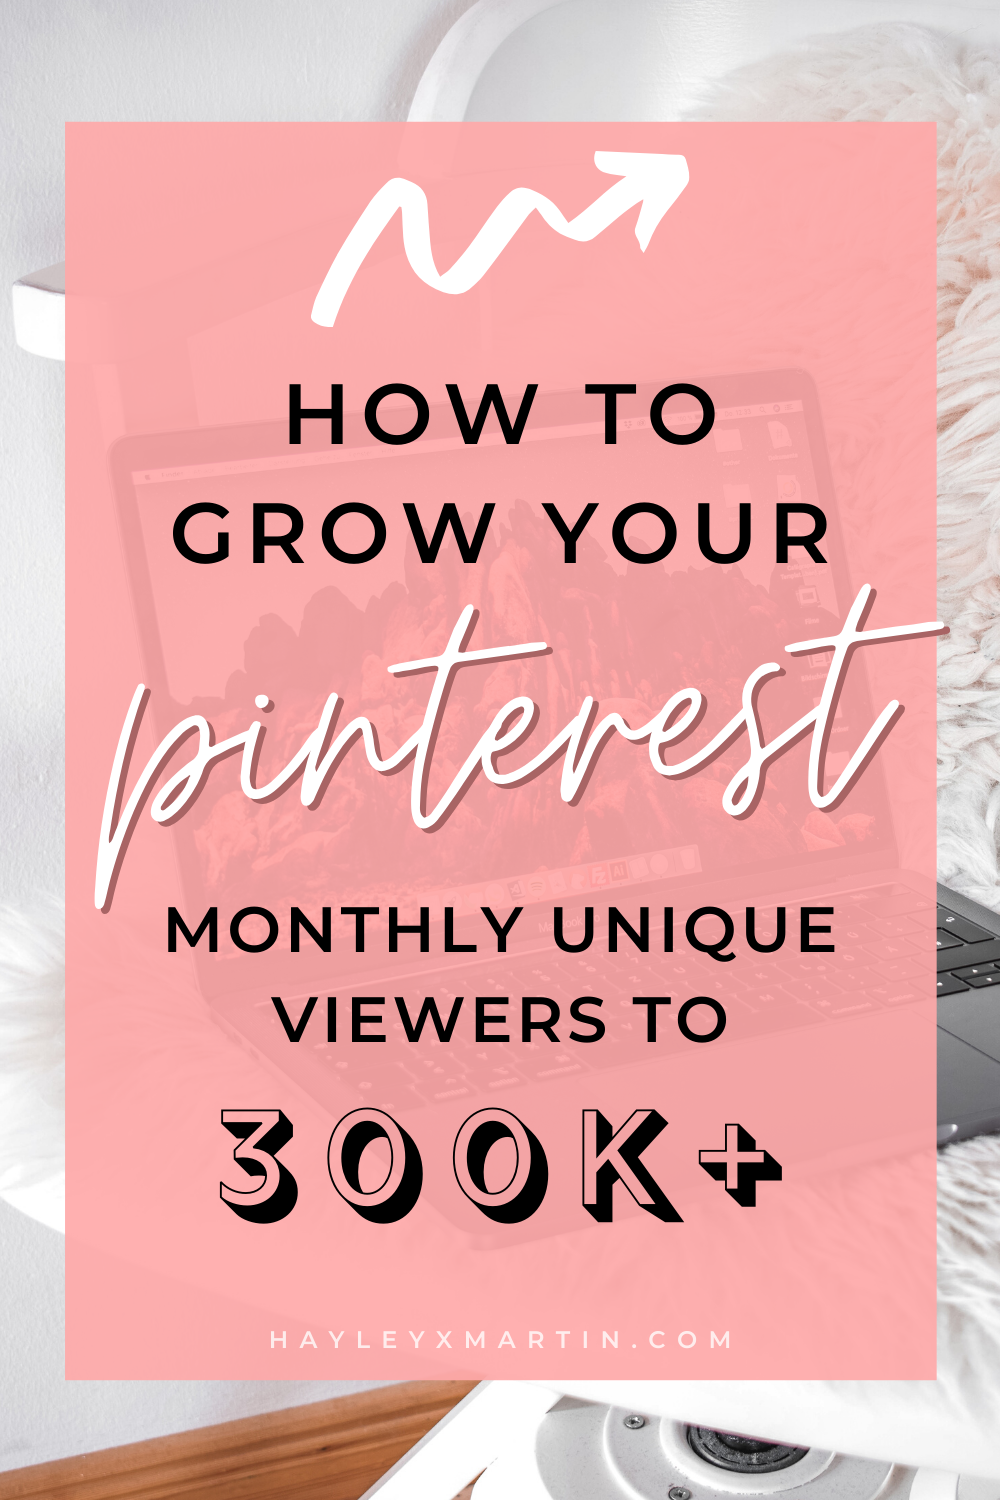 HOW TO GROW YOUR PINTEREST MONTHLY UNIQUE VIEWERS TO 250K+ | HAYLEYXMARTIN